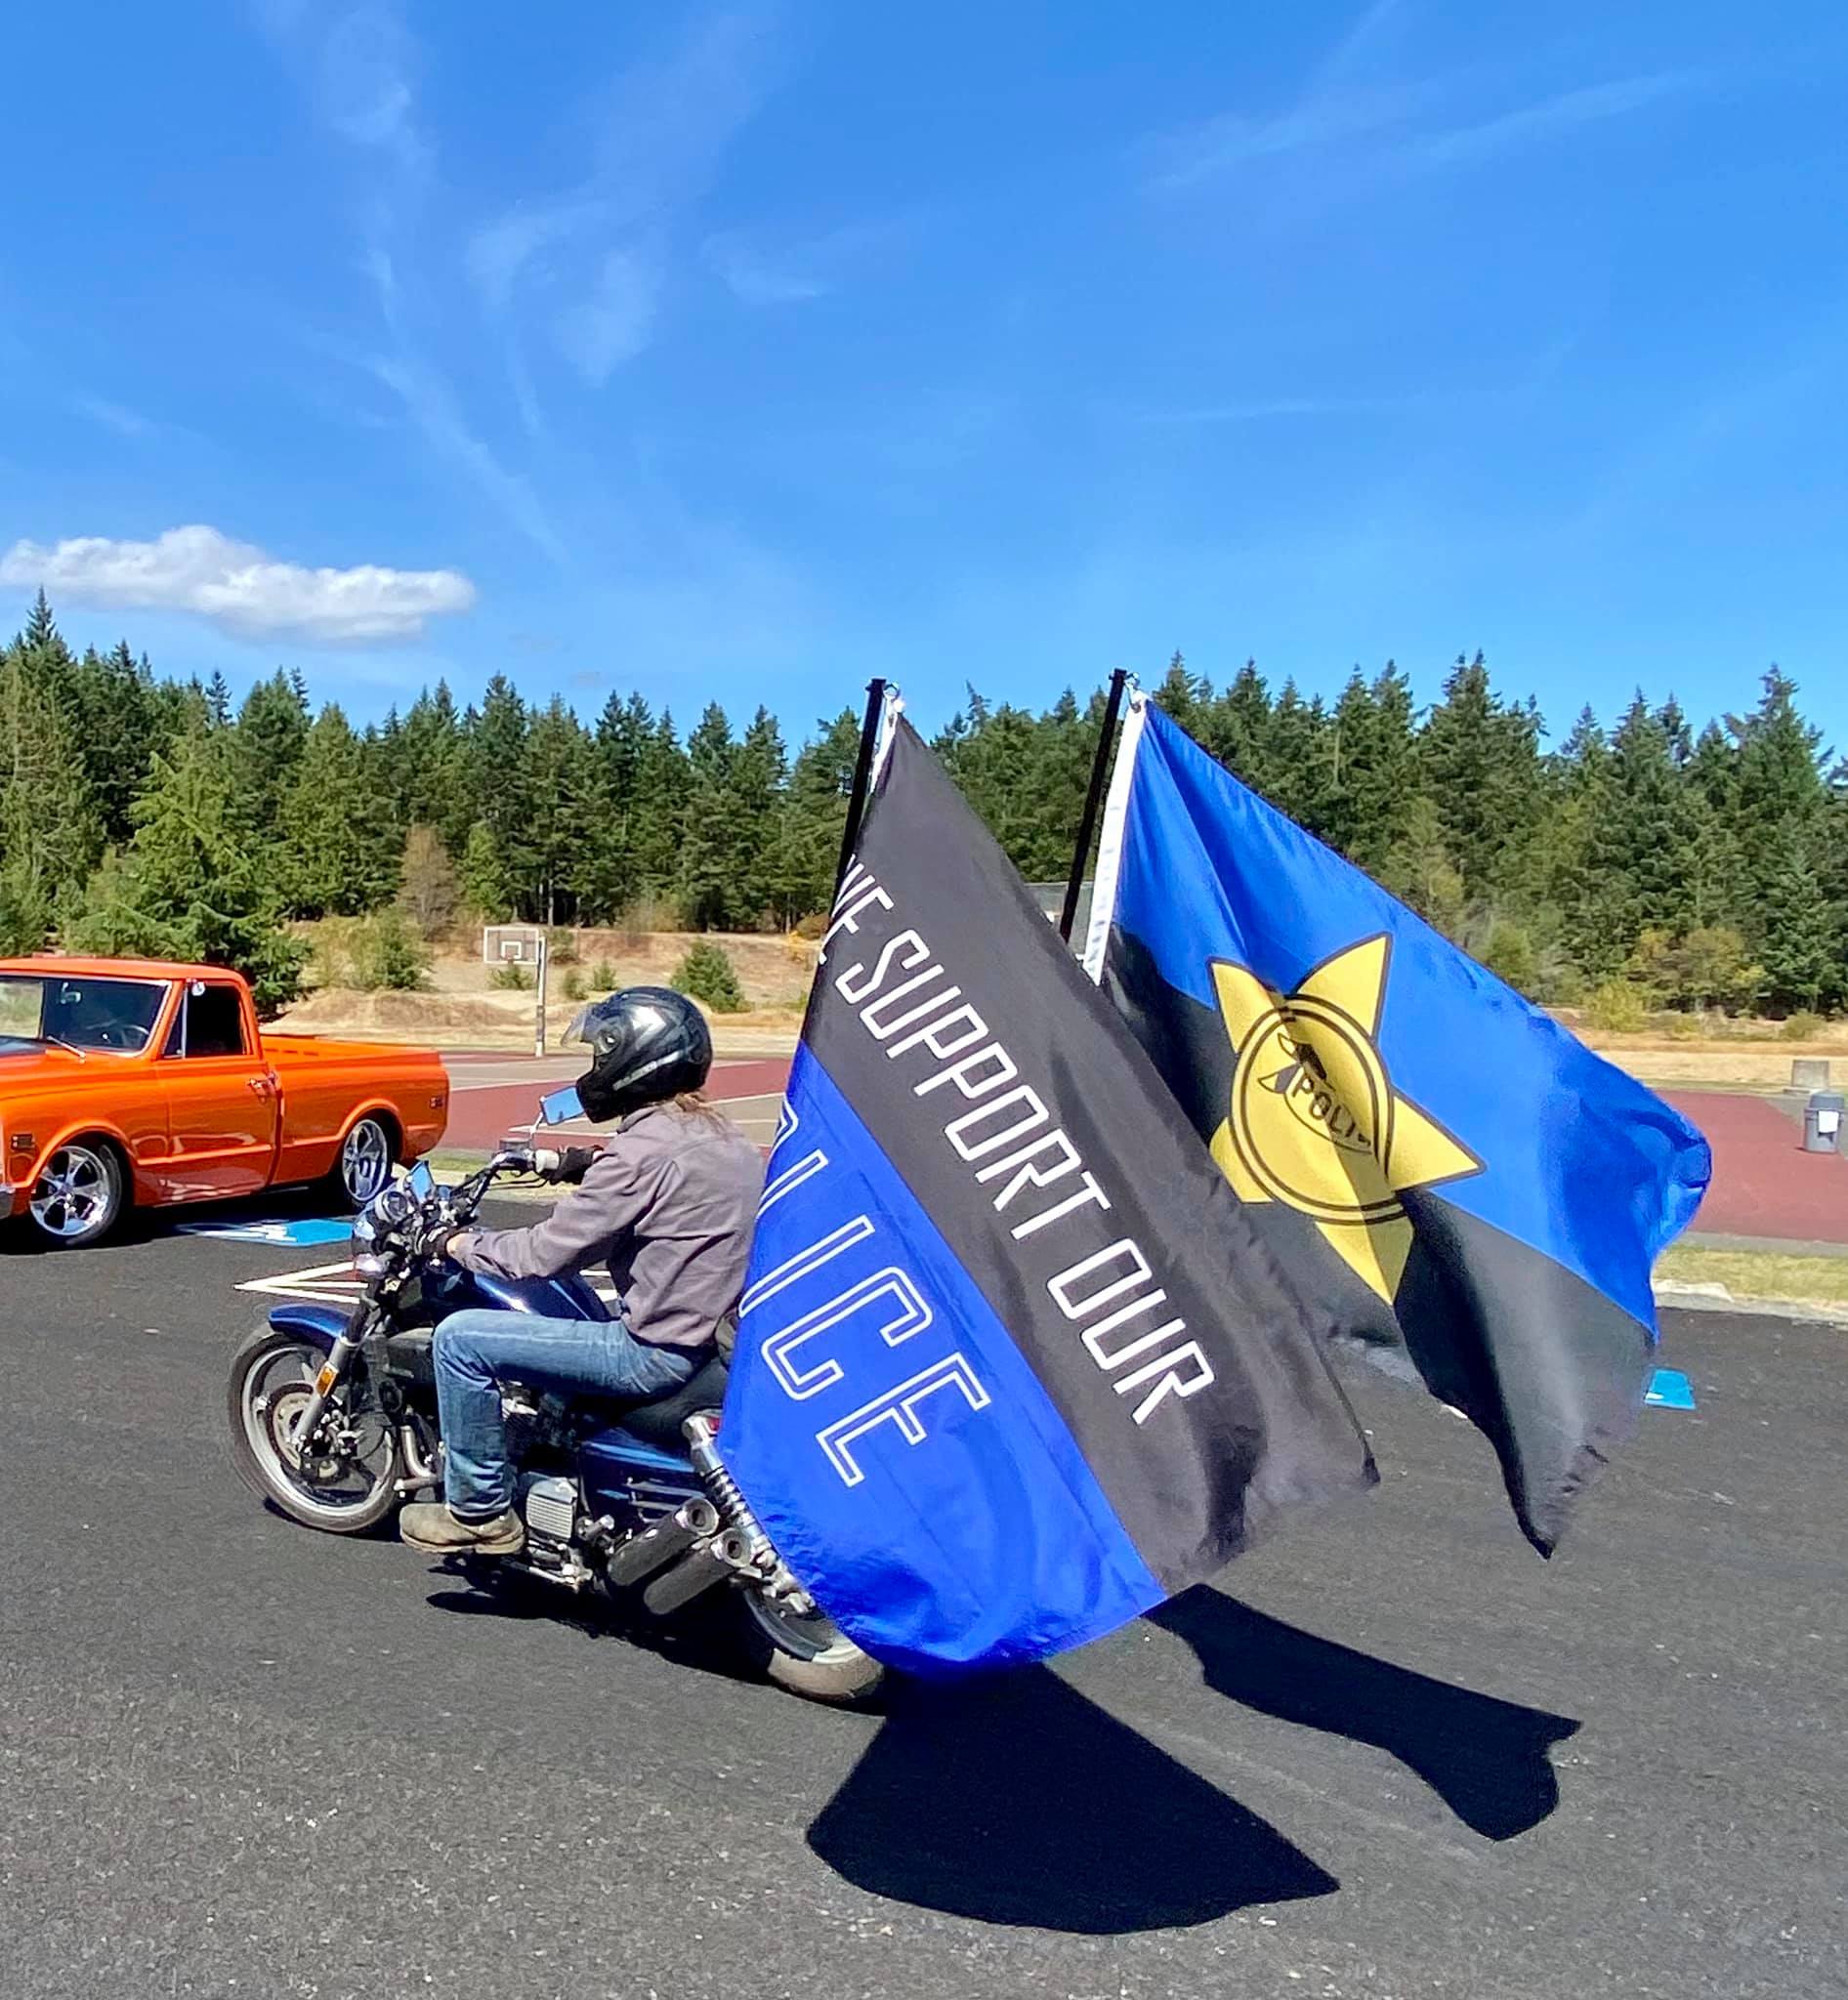 Hundreds of Vehicles Join “Back the Blue” Rally in Jefferson County WA 